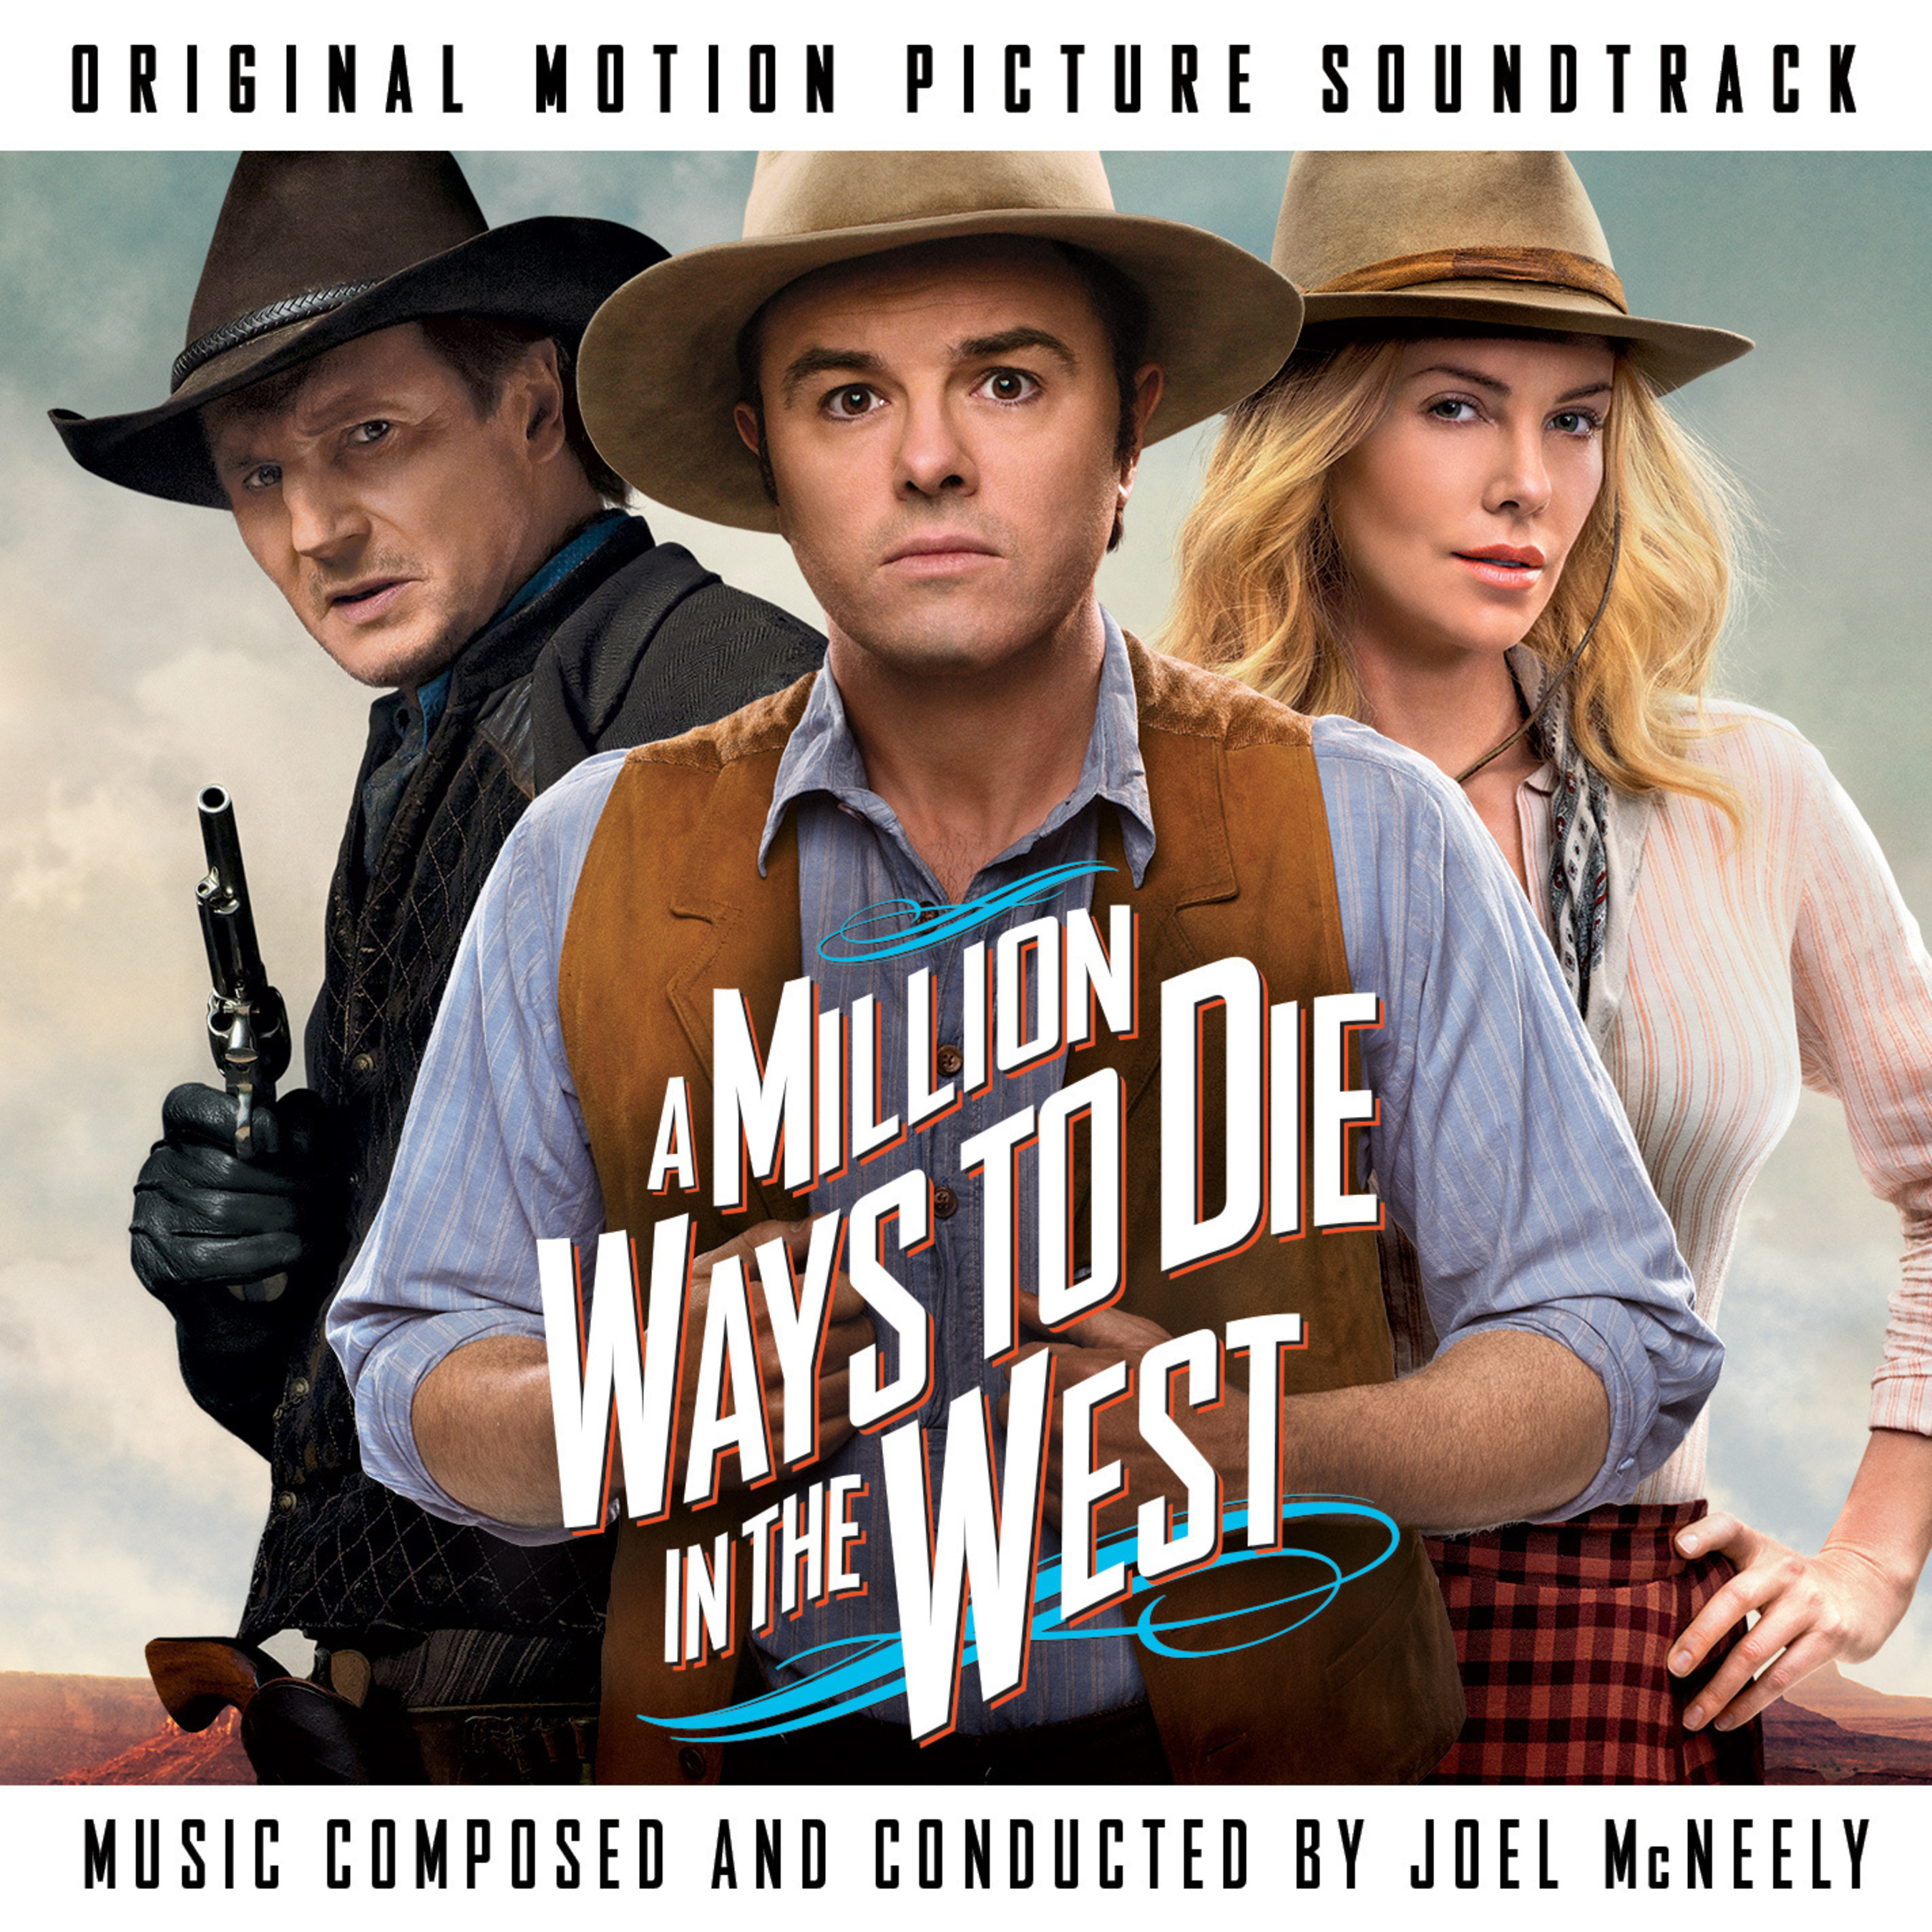 A Million Ways to Die in the West Original Motion Picture Soundtrack. (PRNewsFoto/Back Lot Music)